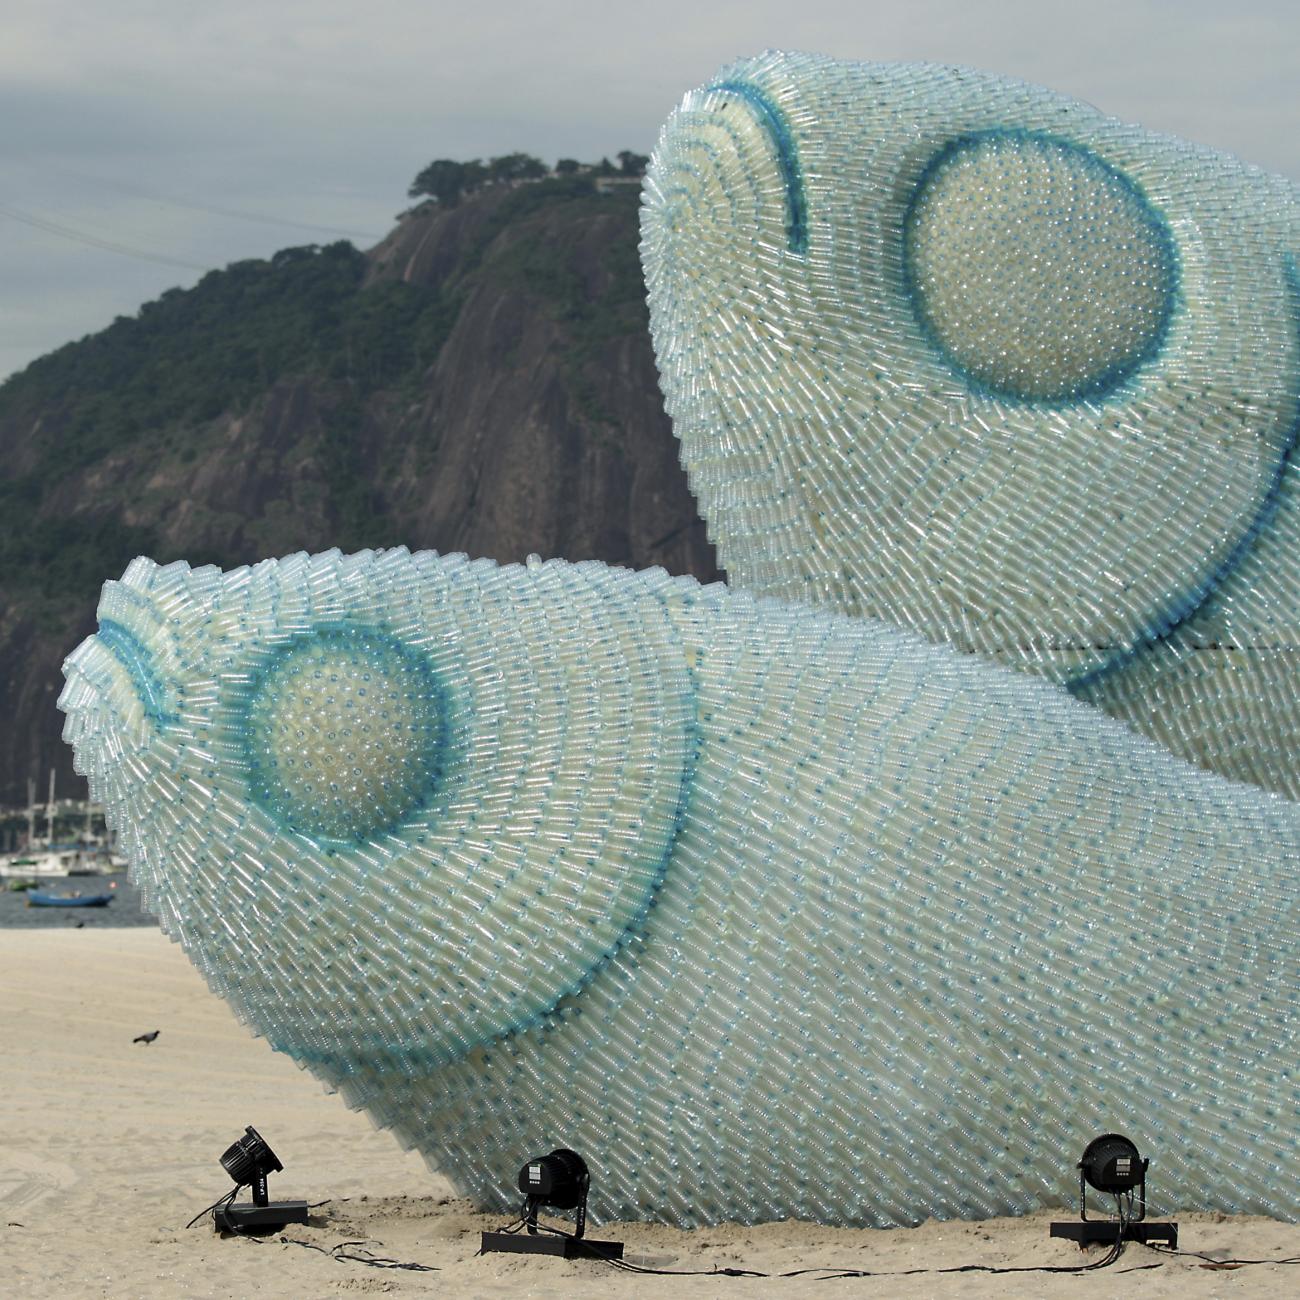 Giant fish made with plastic bottles are exhibited at Botafogo beach, in Rio de Janeiro June 19, 2012. 